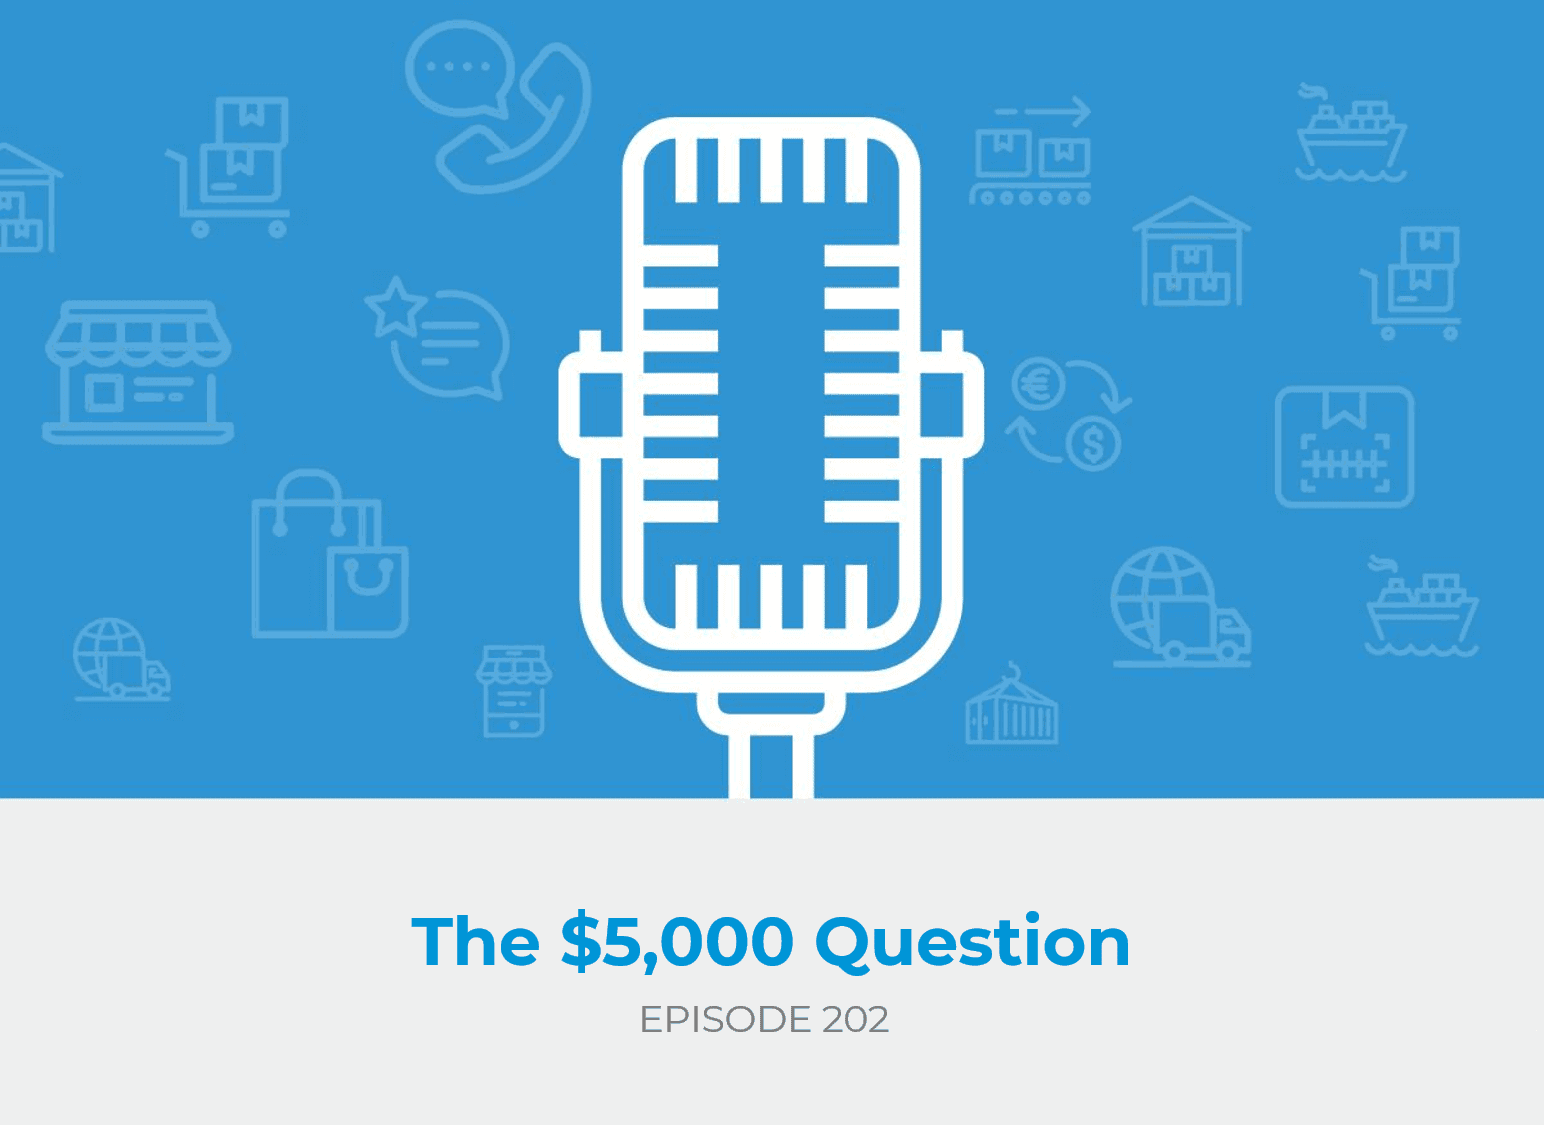 The $5,000 Question